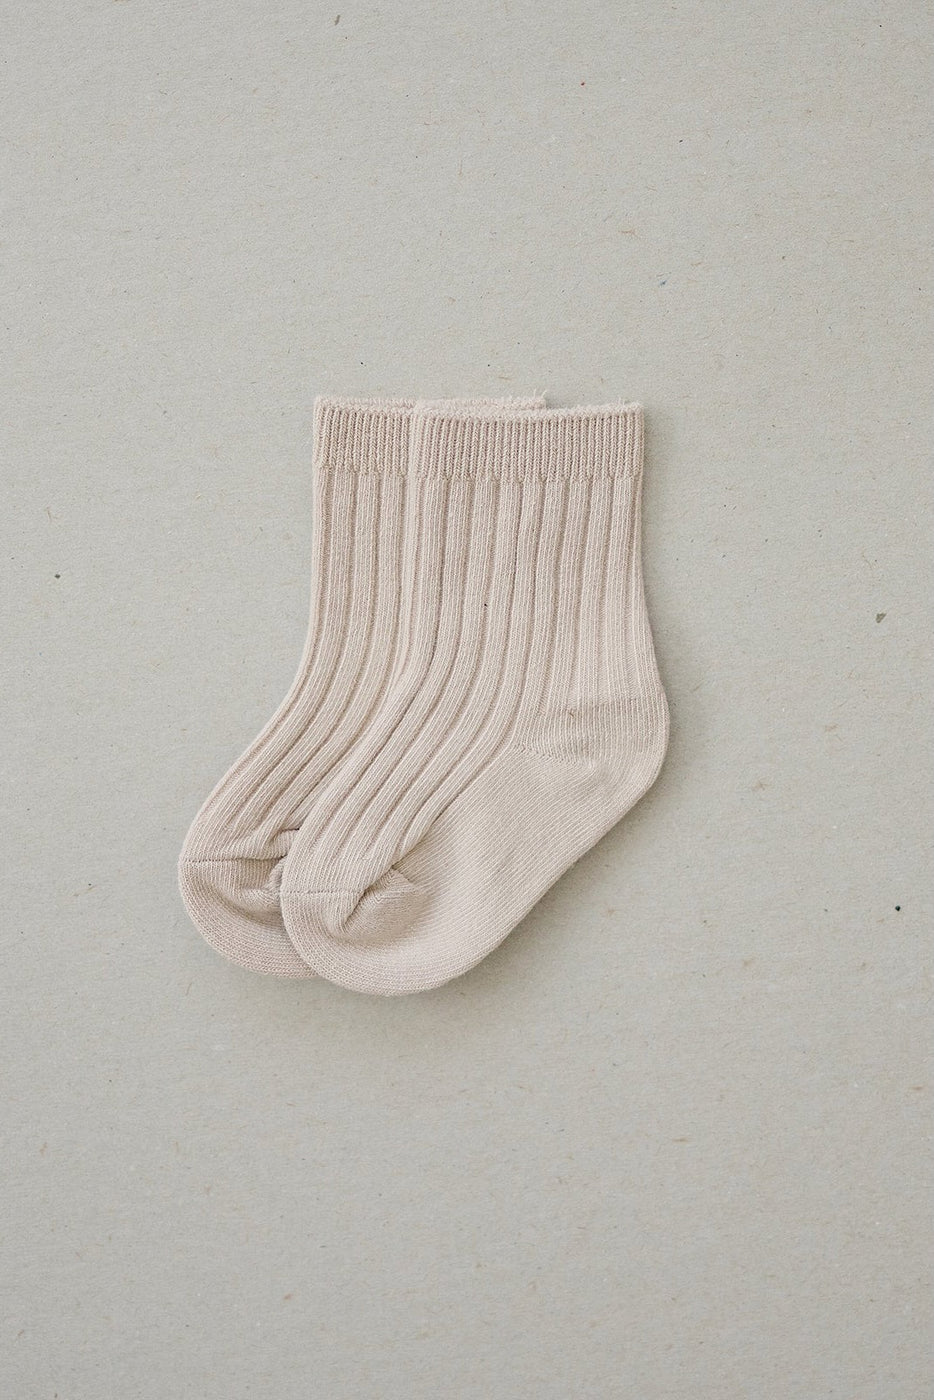 a pair of socks on a white surface